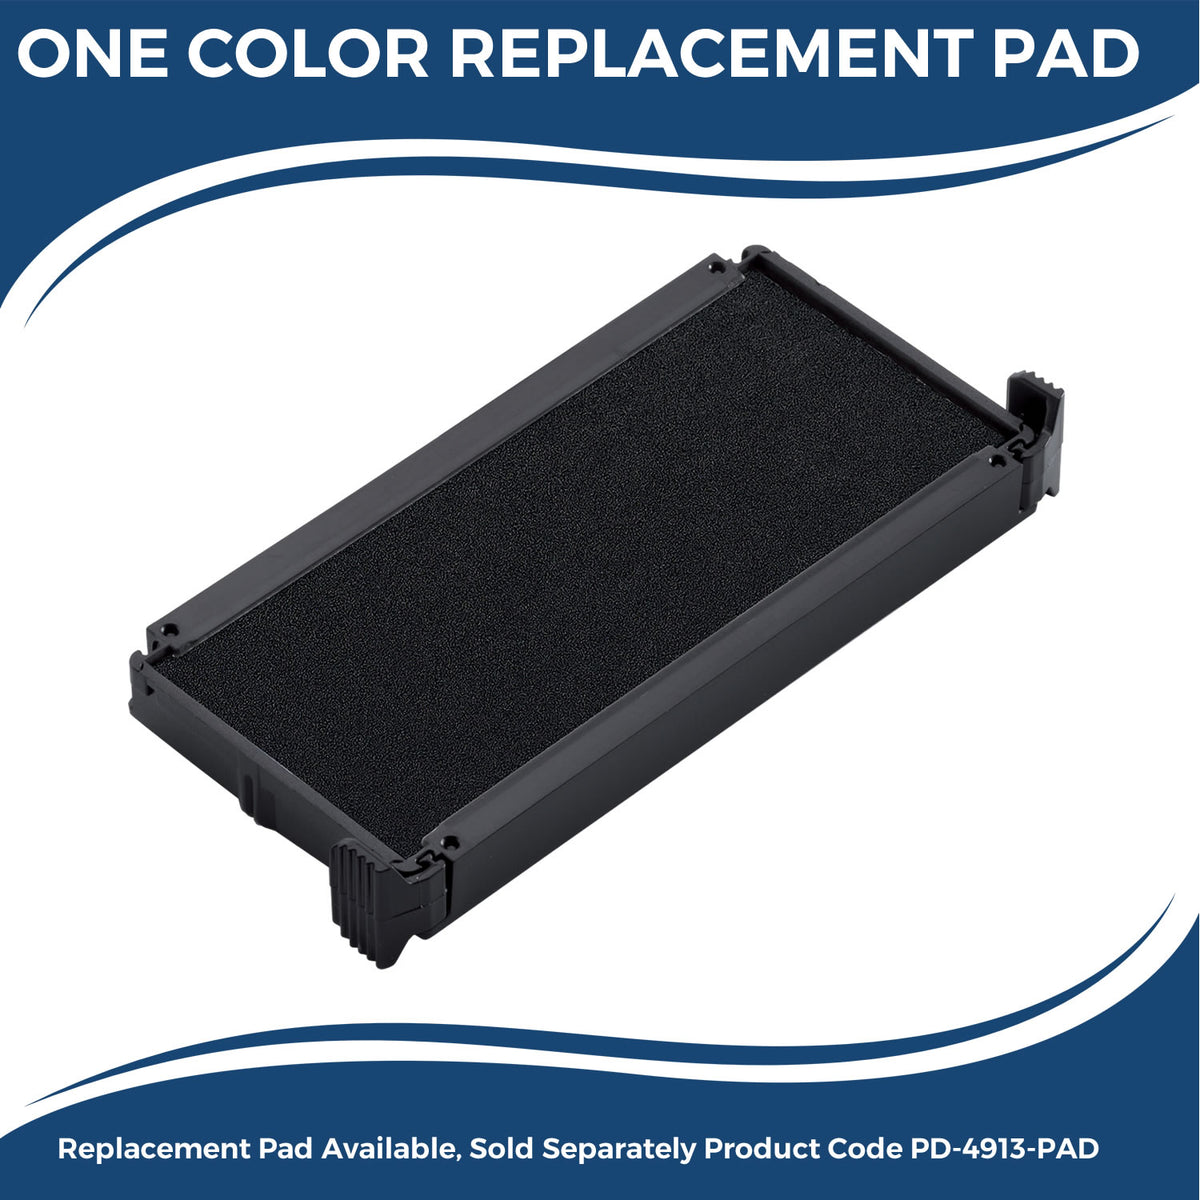 Large Self Inking Capitation Stamp 4537S Large Replacment Pad